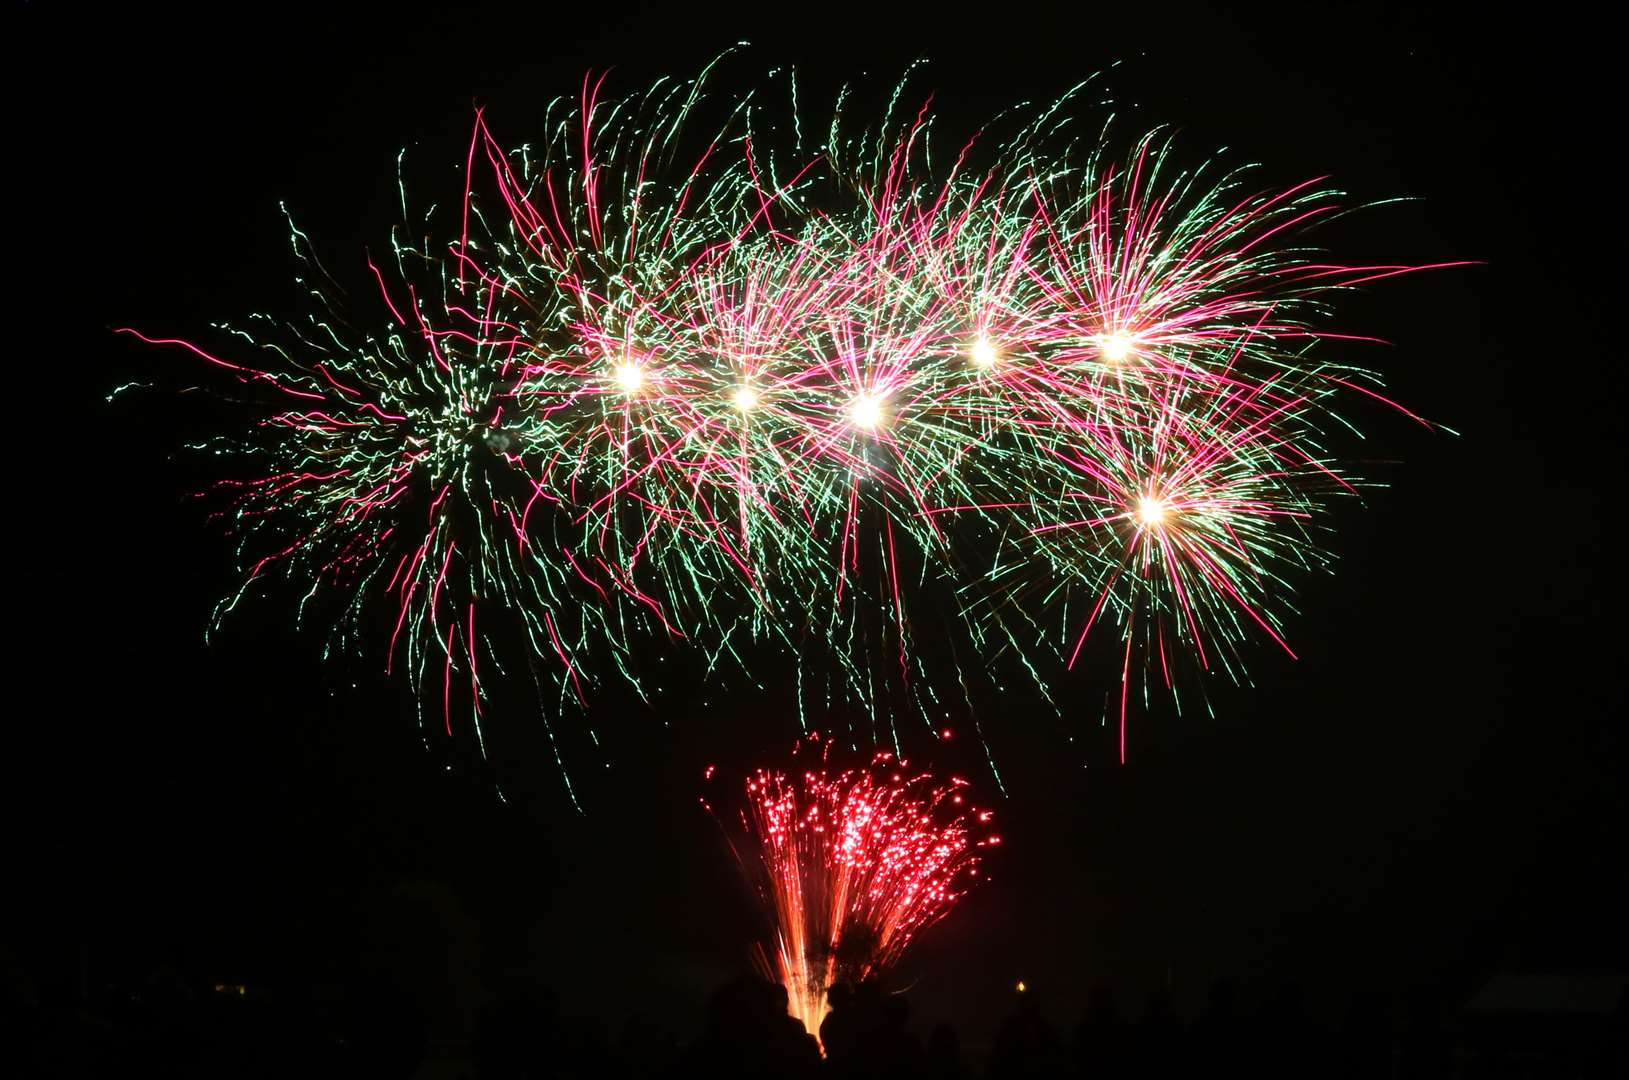 The Turriff Fireworks Against Cancer organisers will host an online event on Saturday evening.